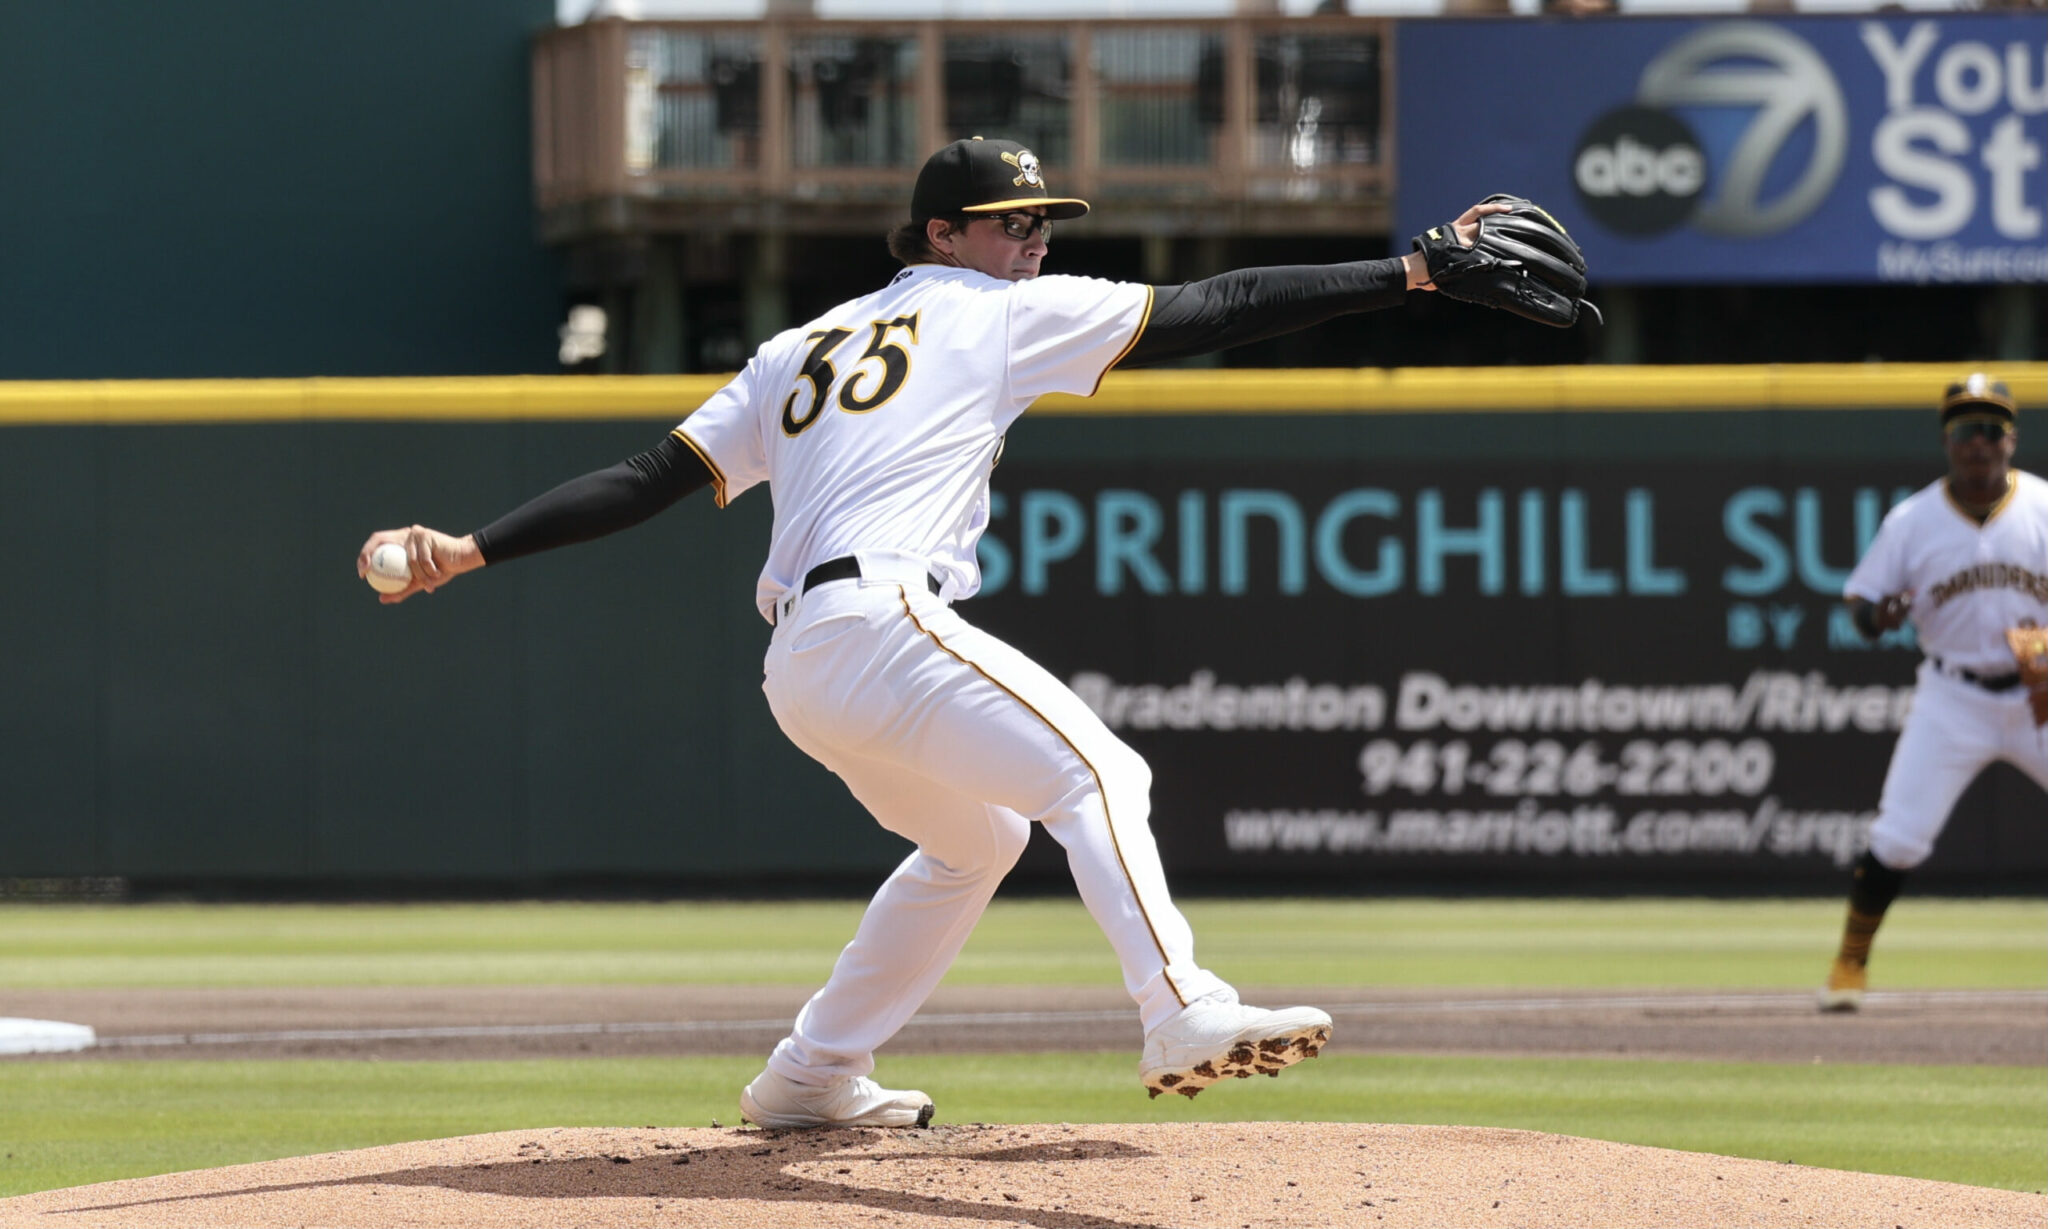 Pirates Prospects Daily: The Strength Of The System Rests In The Lower Levels